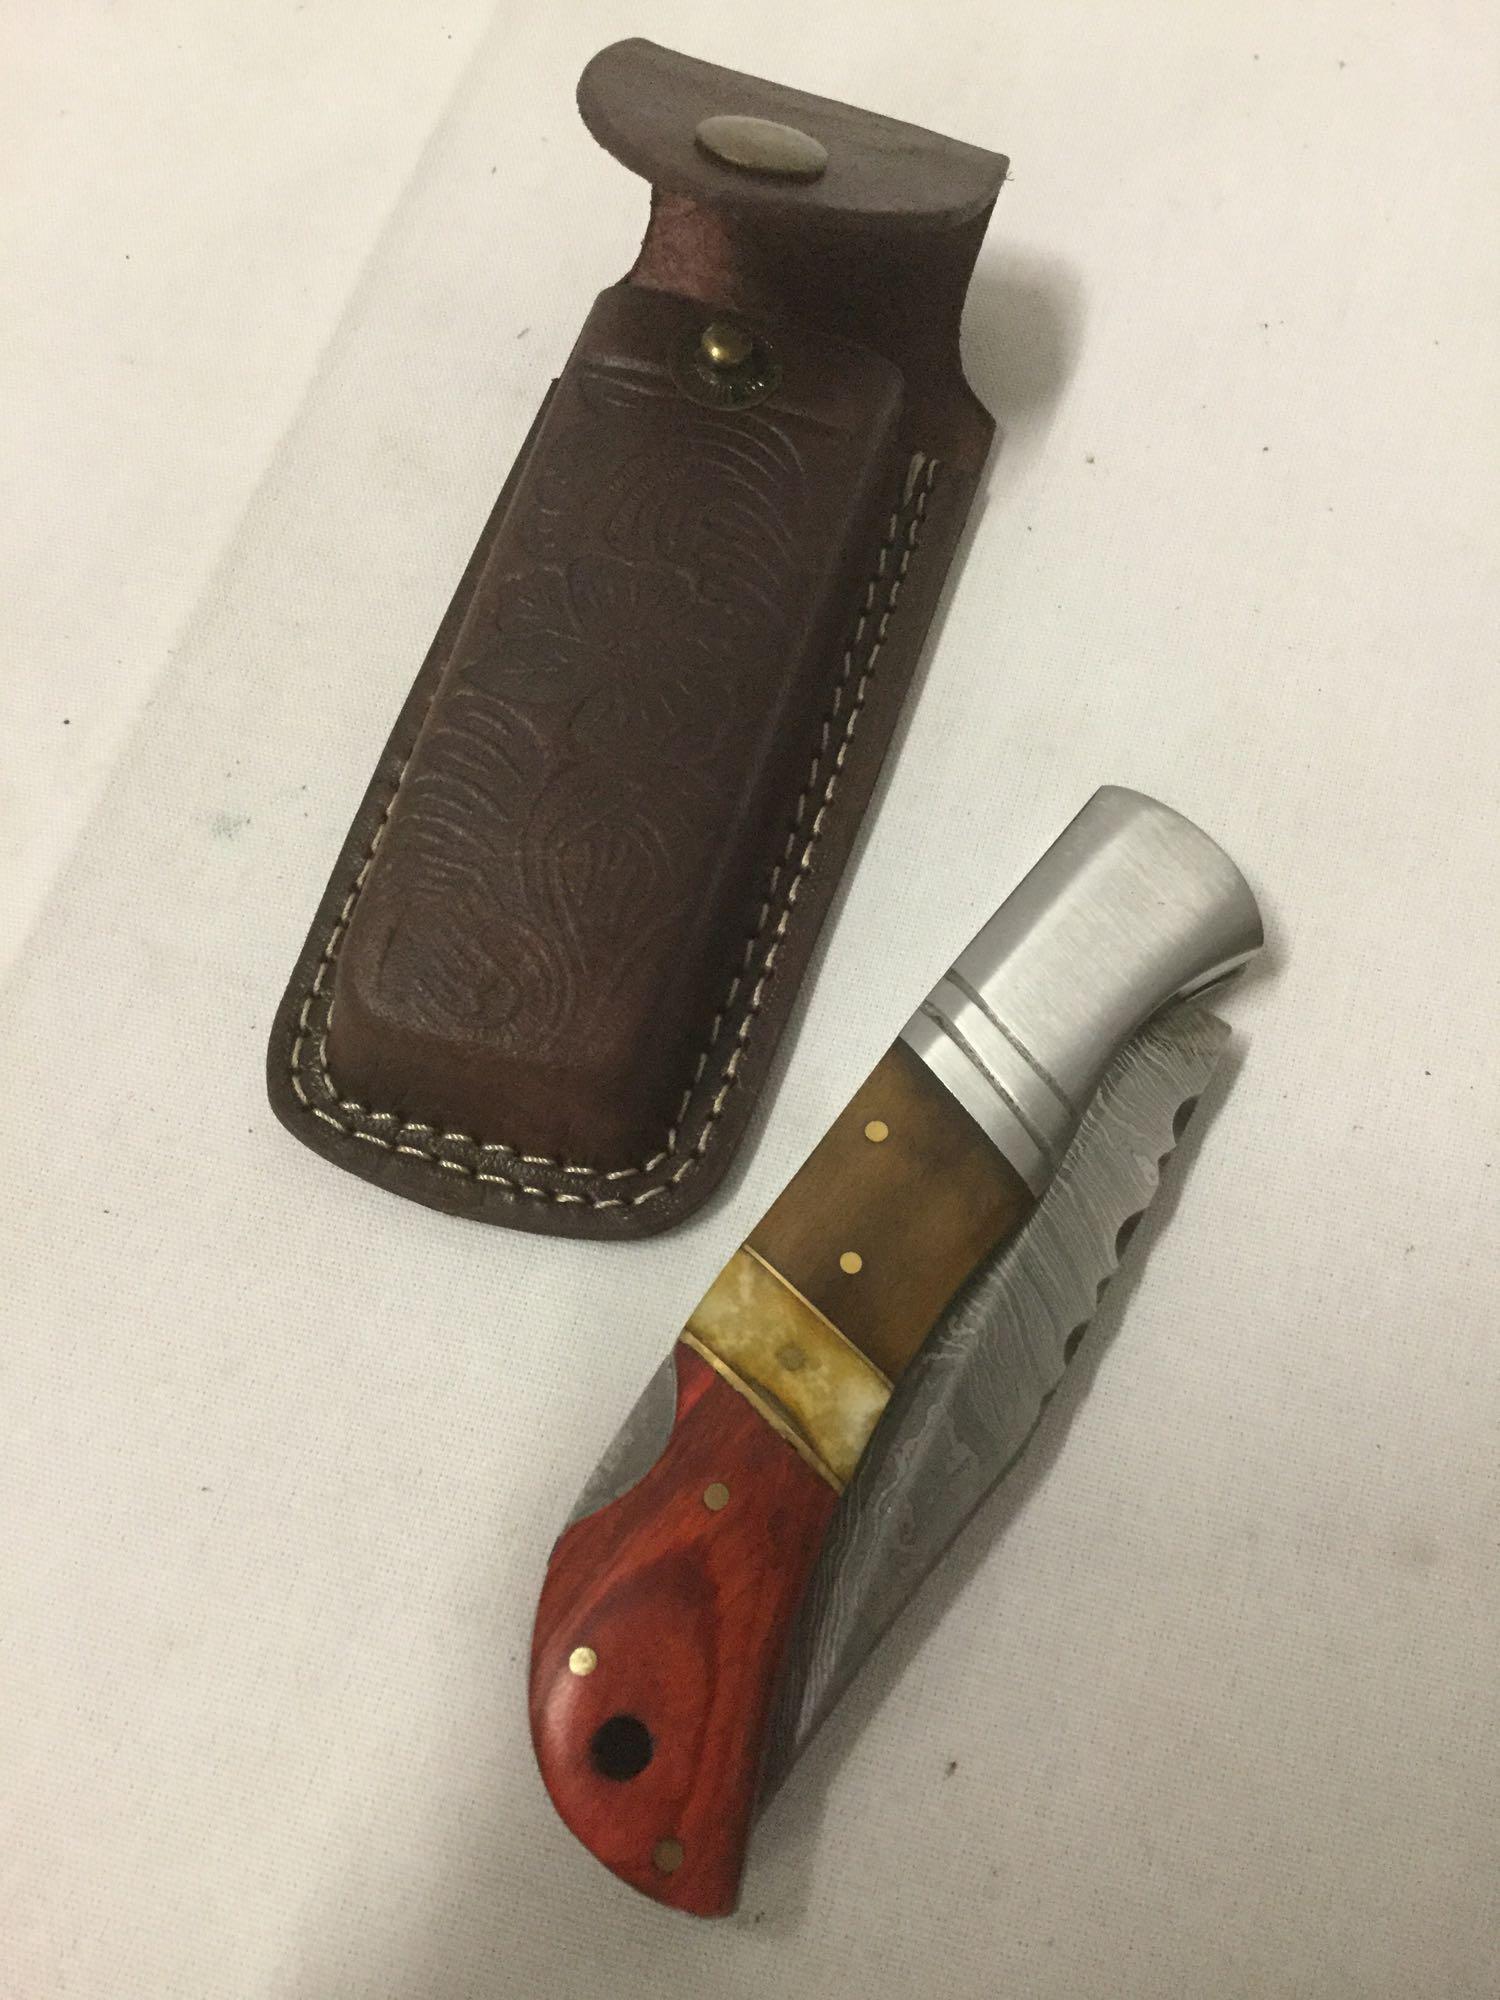 Lot of 2 vintage knives incl. pocket knife with triple inlay handle and bone handled hunting knife